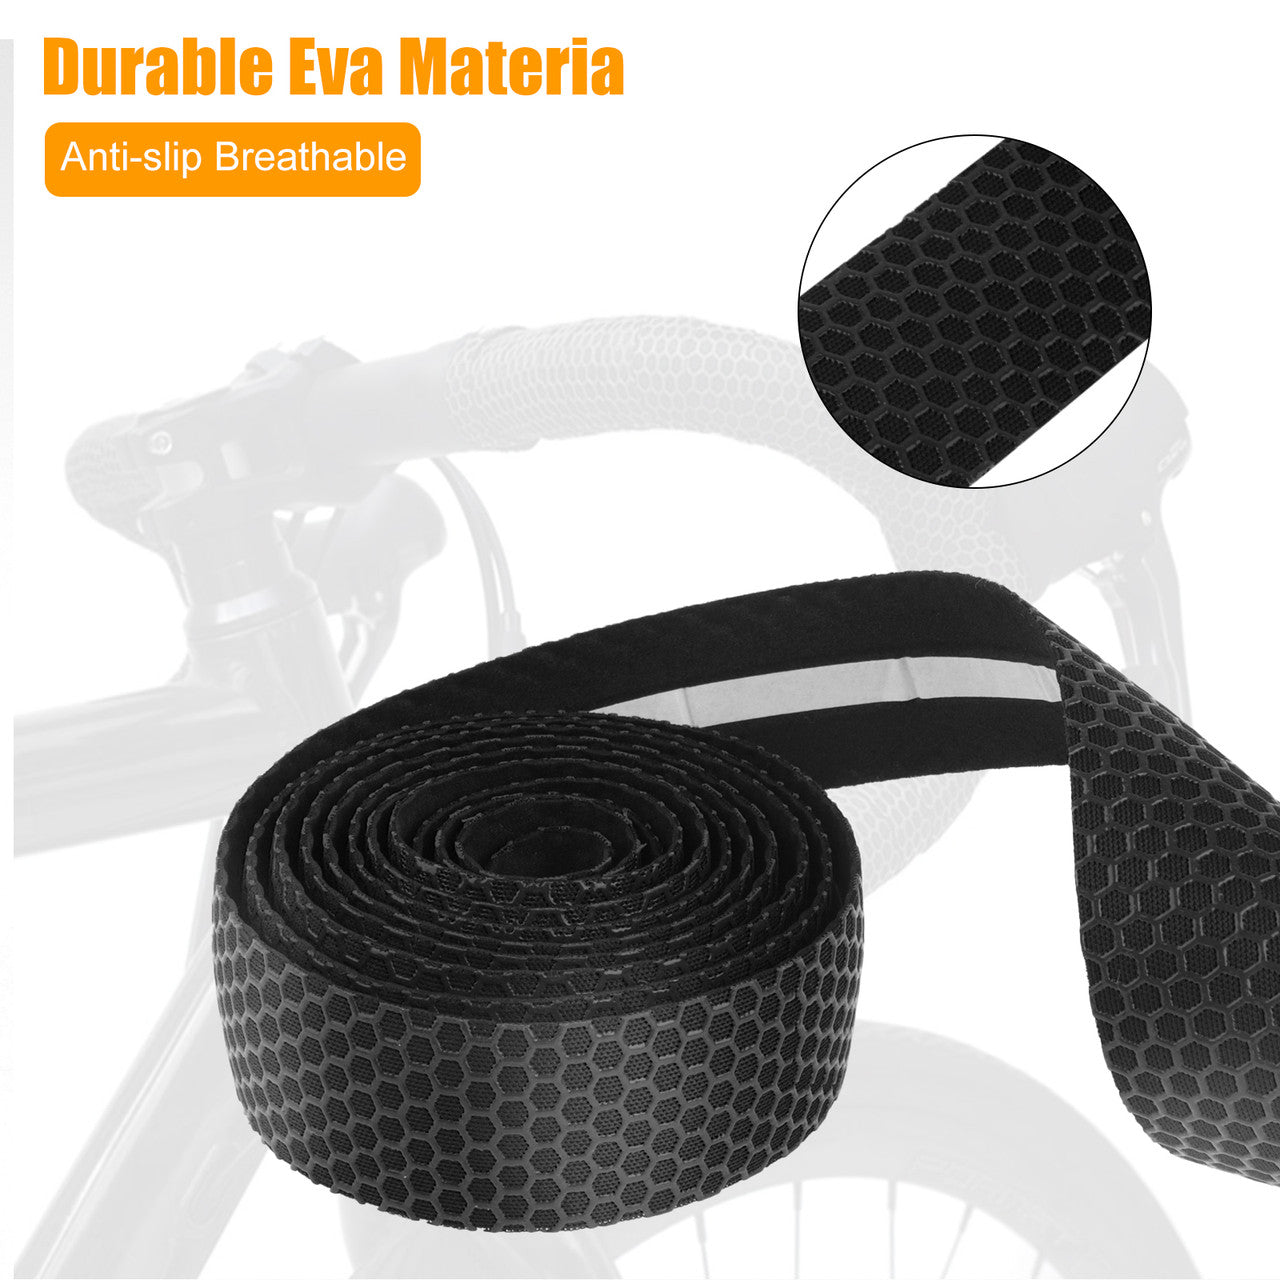 Honeycomb Silicone Handle for Bicycles with Quick Drying Characteristics, Black